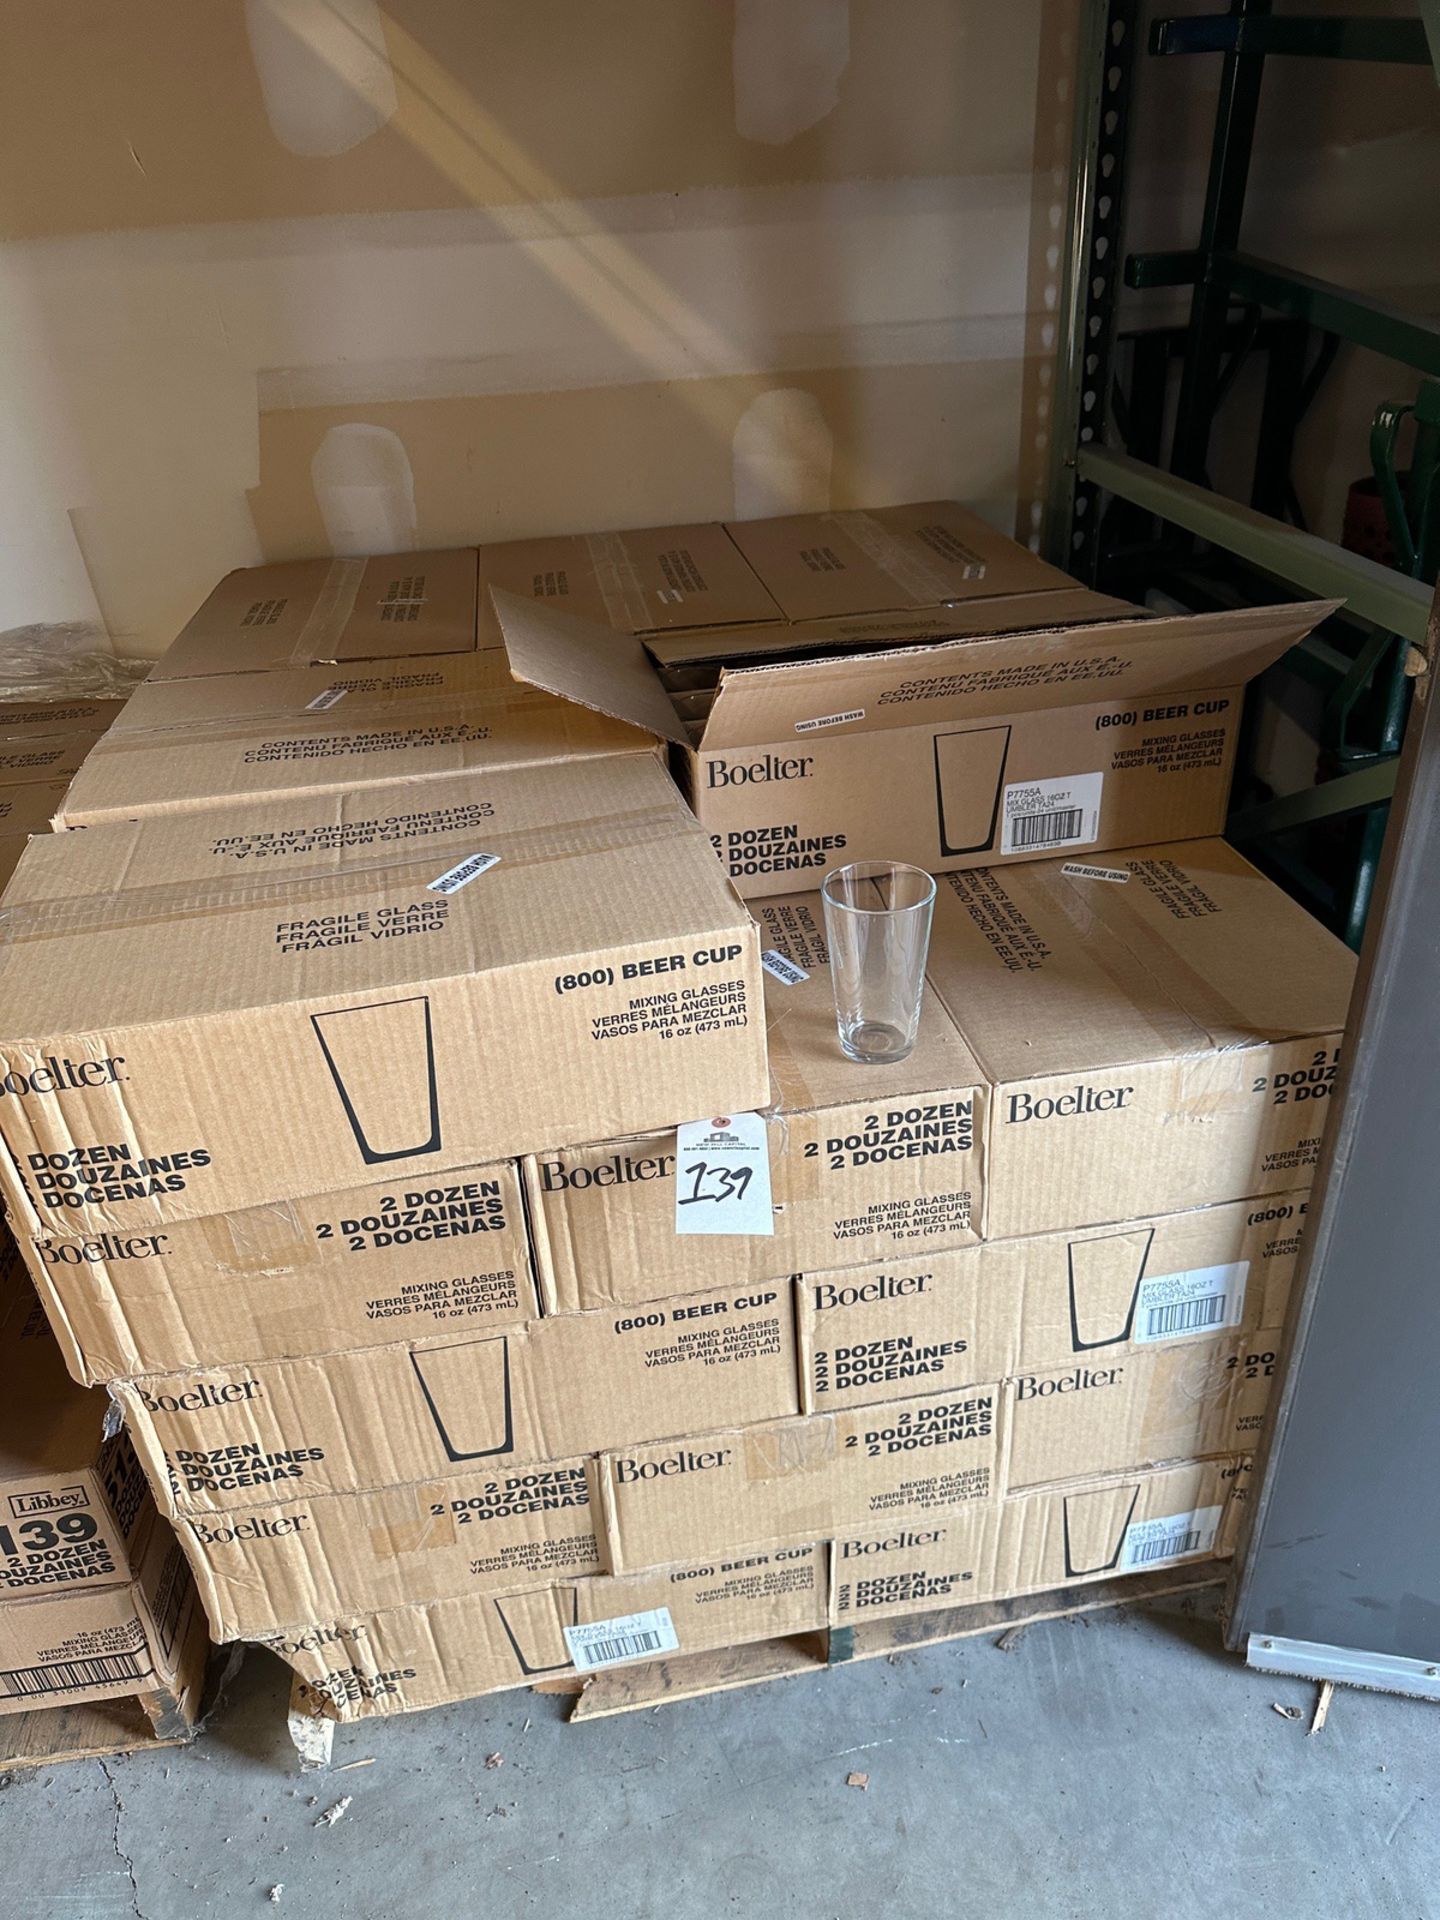 Boelter 16 oz Tumbler Clear Glass Pint - Approx 34 Cases on Pallet - Subj to Bulk | Rig Fee $35 - Image 3 of 3